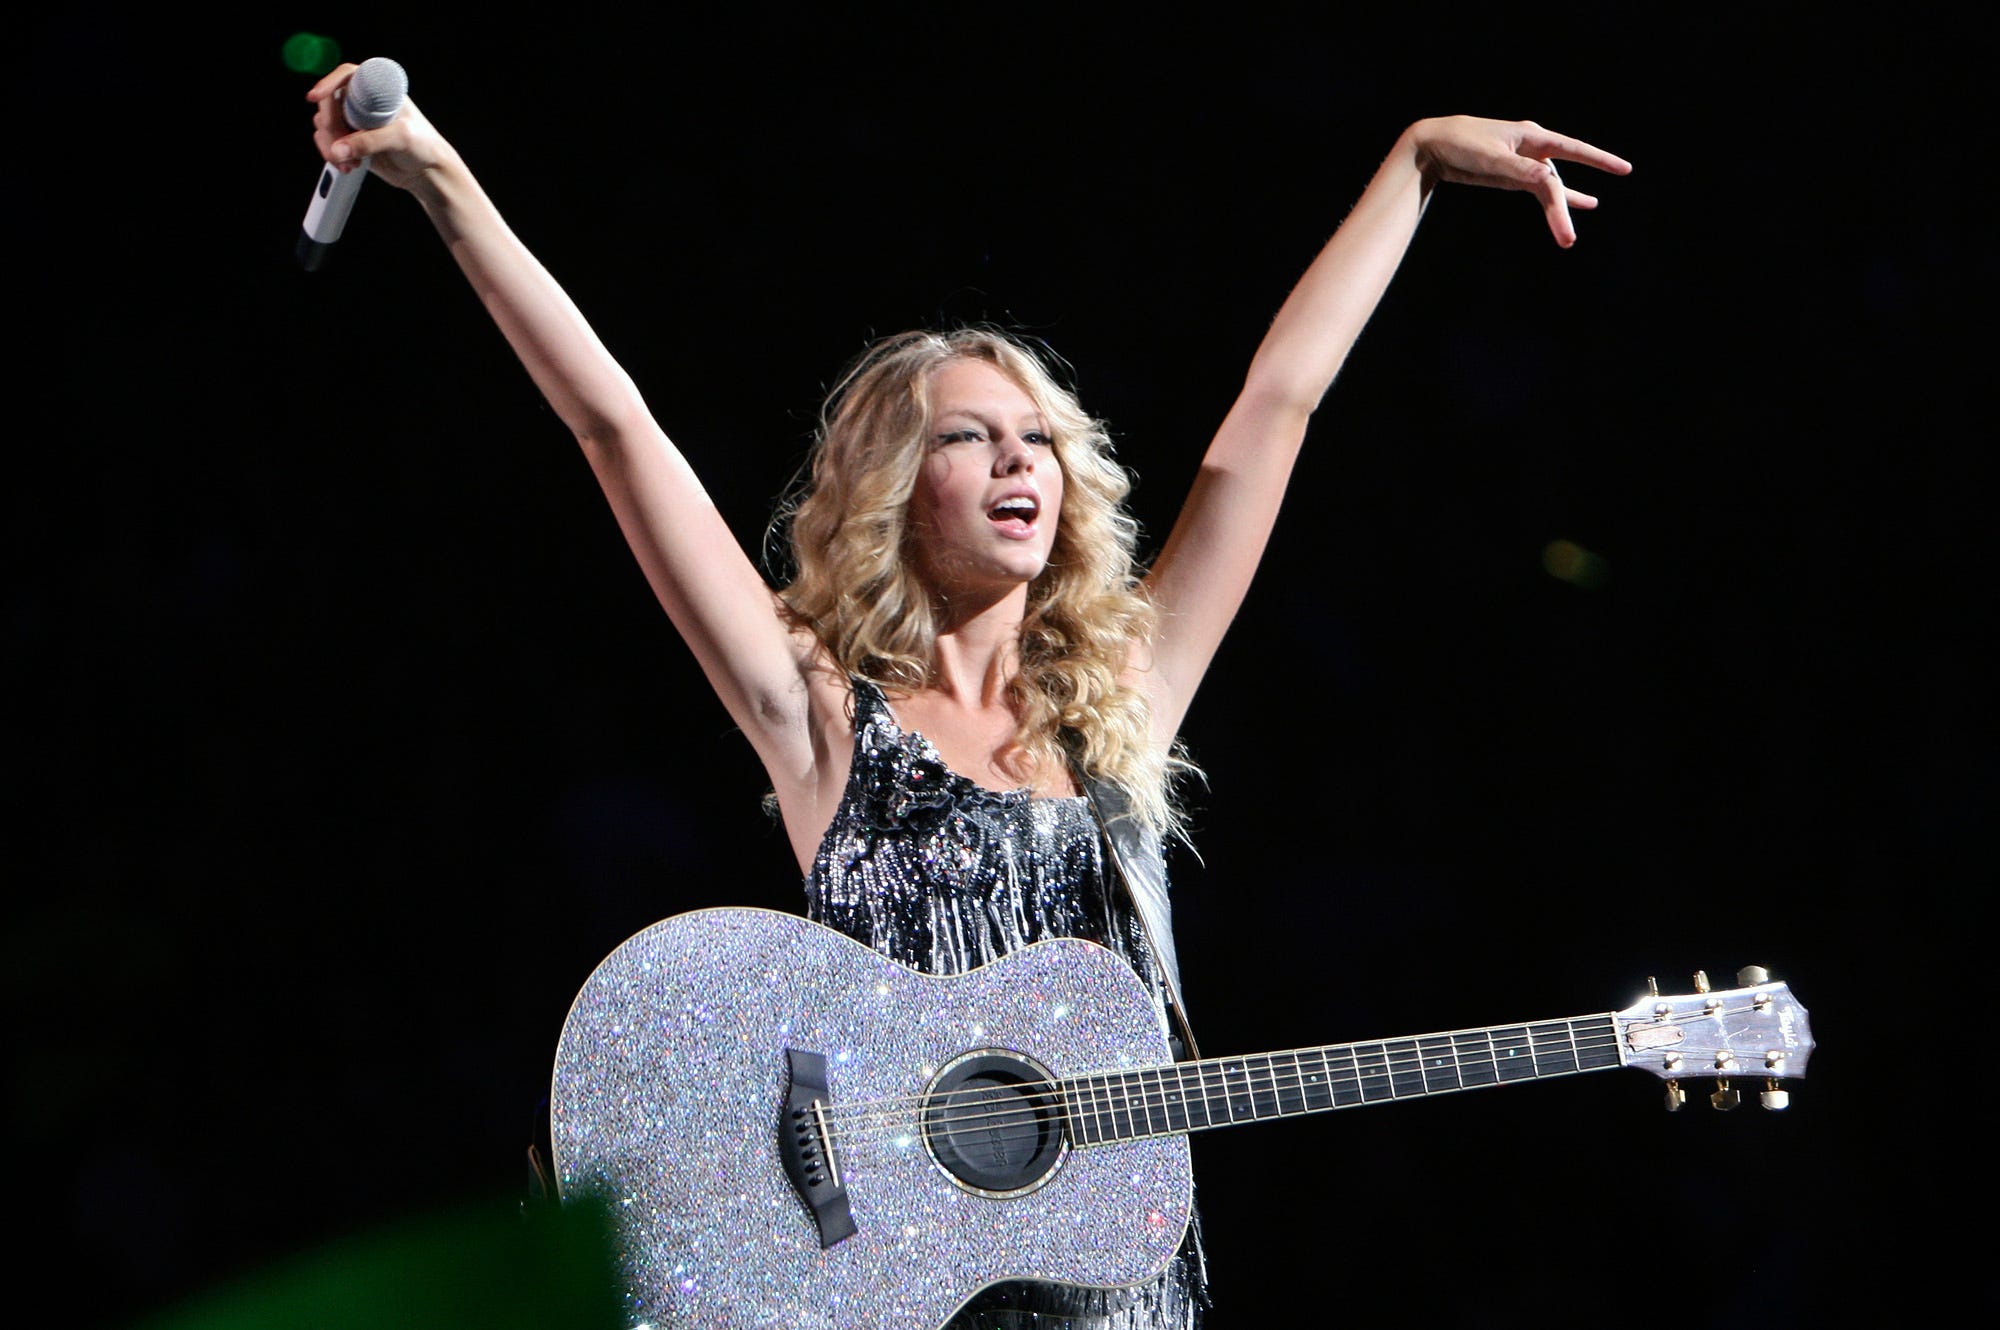 Taylor Swift sings one of her songs during the Fearless Tour 2009 at Value City Arena, July 17, 2009. (Dispatch photo by Kyle Robertson)